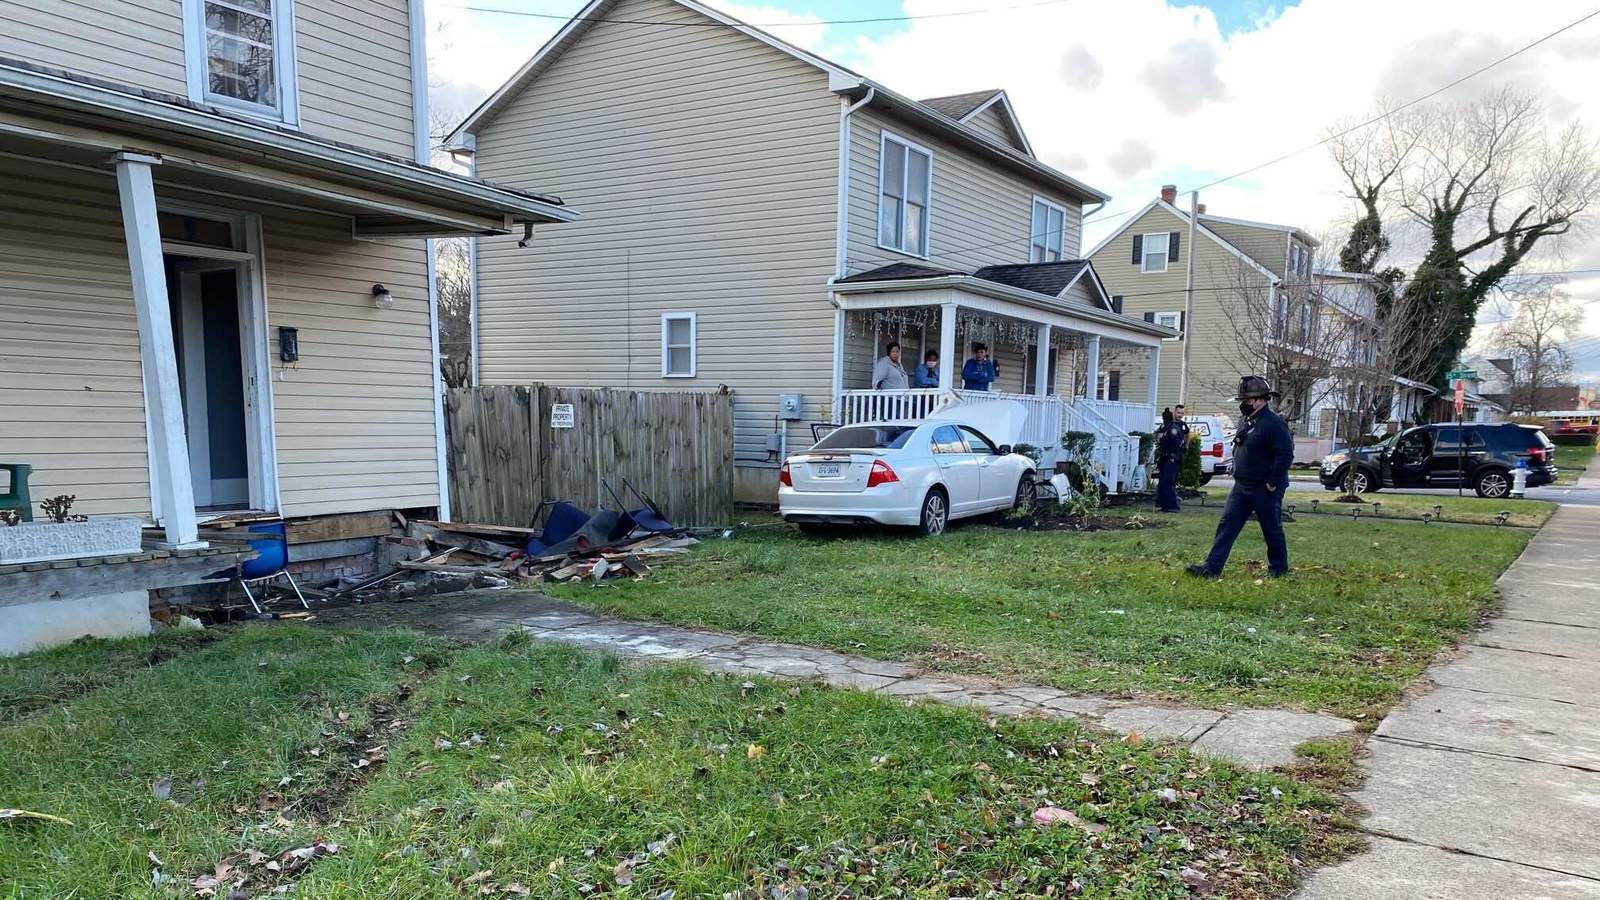 Driver charged after crashing into two houses in northwest Roanoke